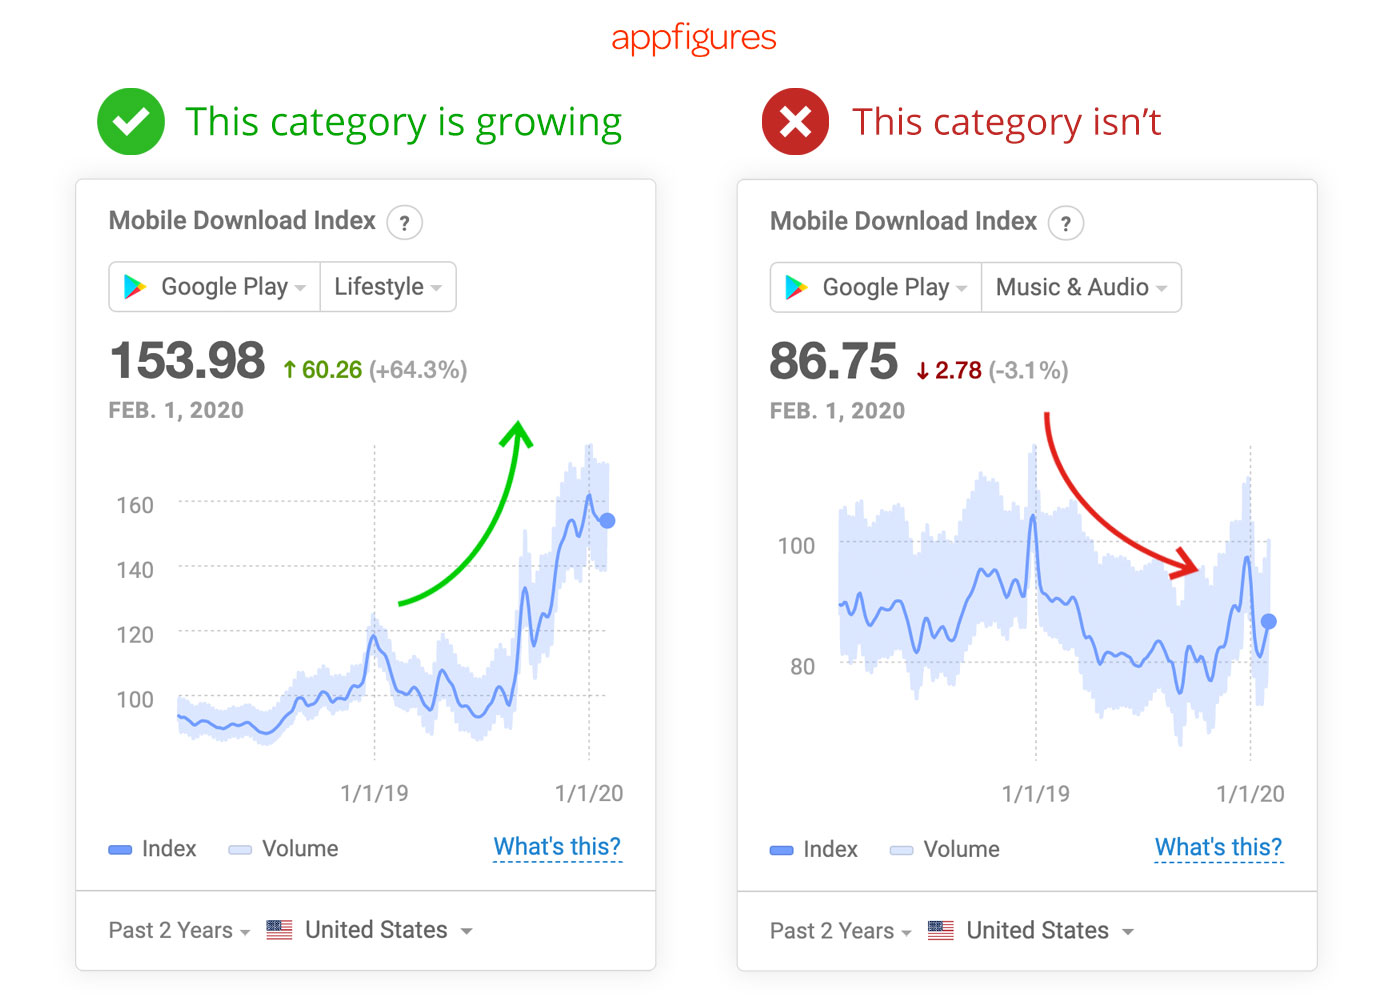 Don't spend time building an app that won't sell. Use the Mobile Download Index from Appfigures